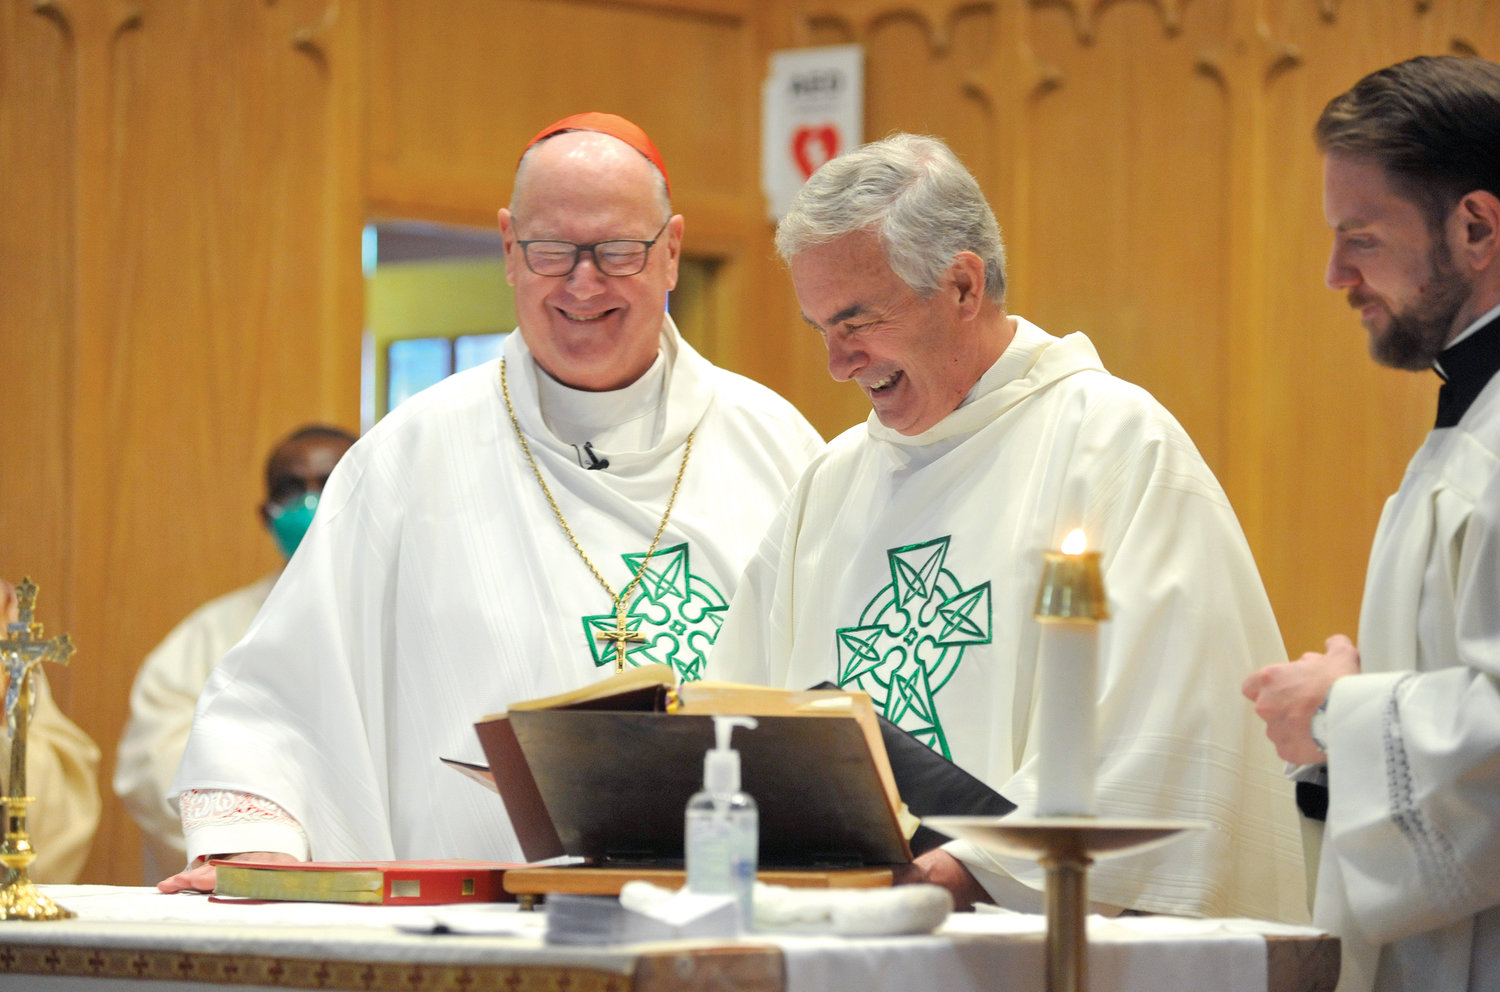 Father Thomas Colucci is installed as pastor of Most Precious Blood parish by Cardinal Dolan at a Mass celebrating the 125th anniversary of the church in Walden Nov. 6.